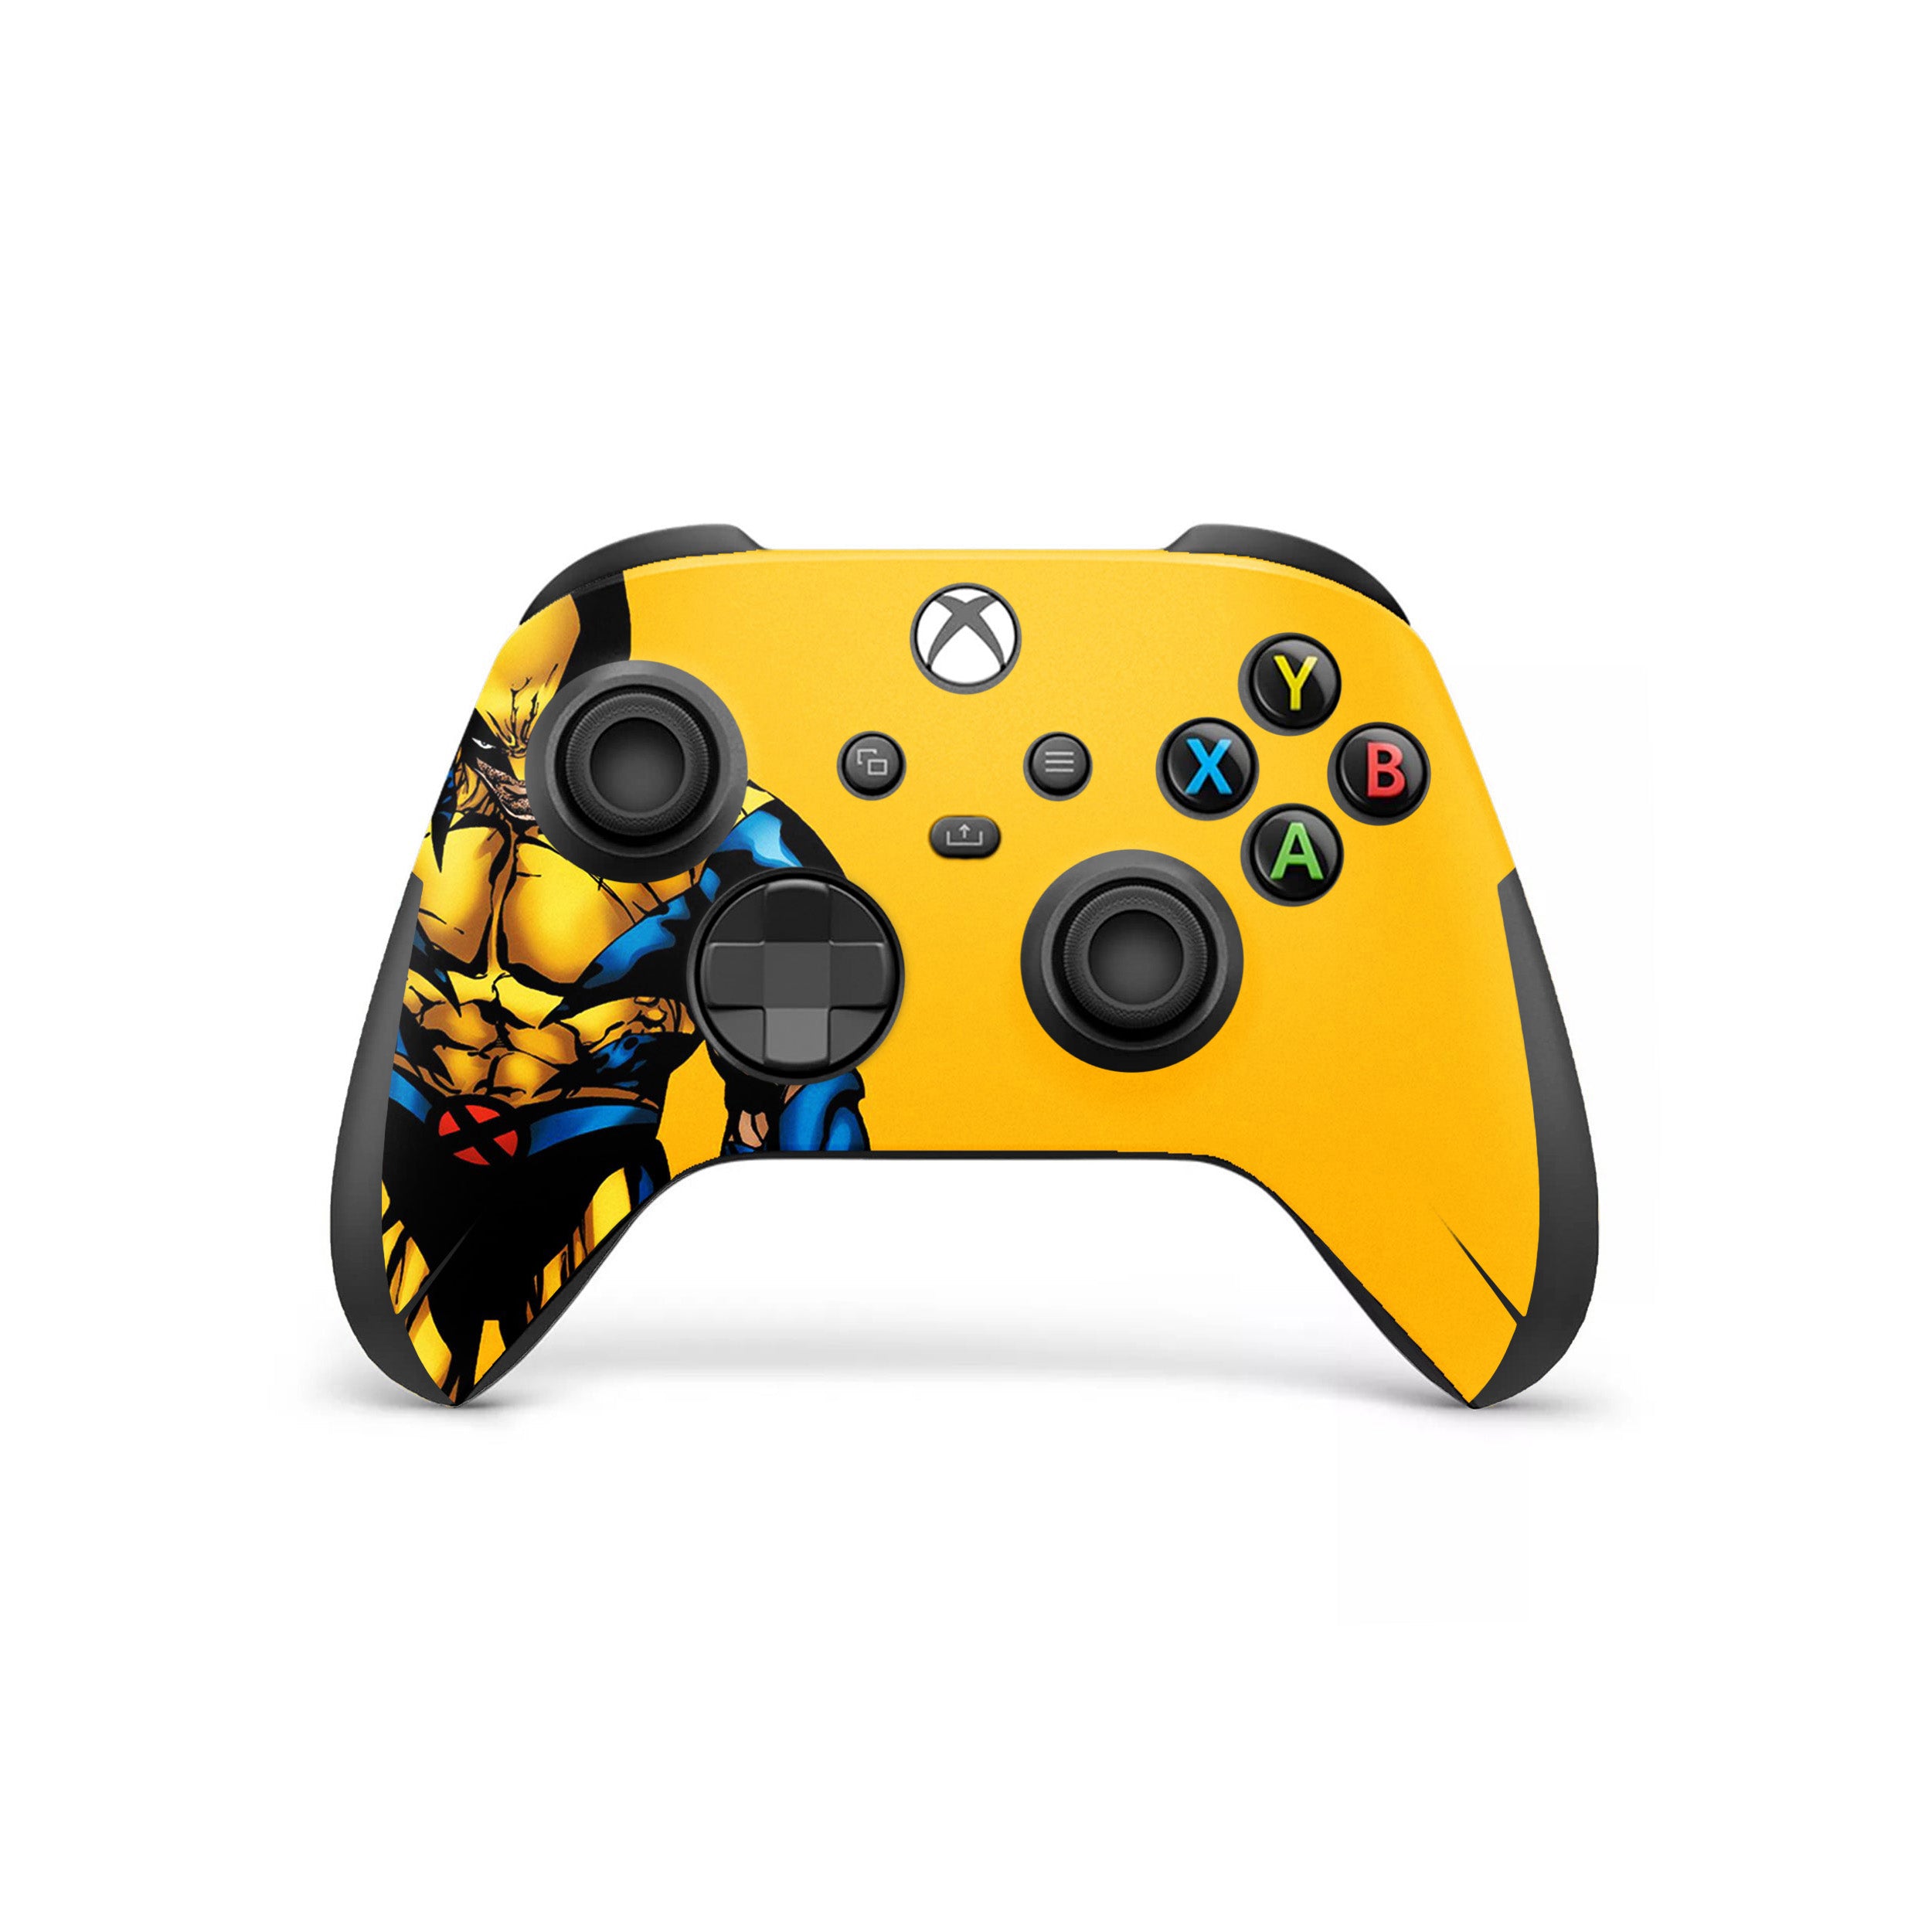 A video game skin featuring a Marvel X Men Wolverine design for the Xbox Wireless Controller.